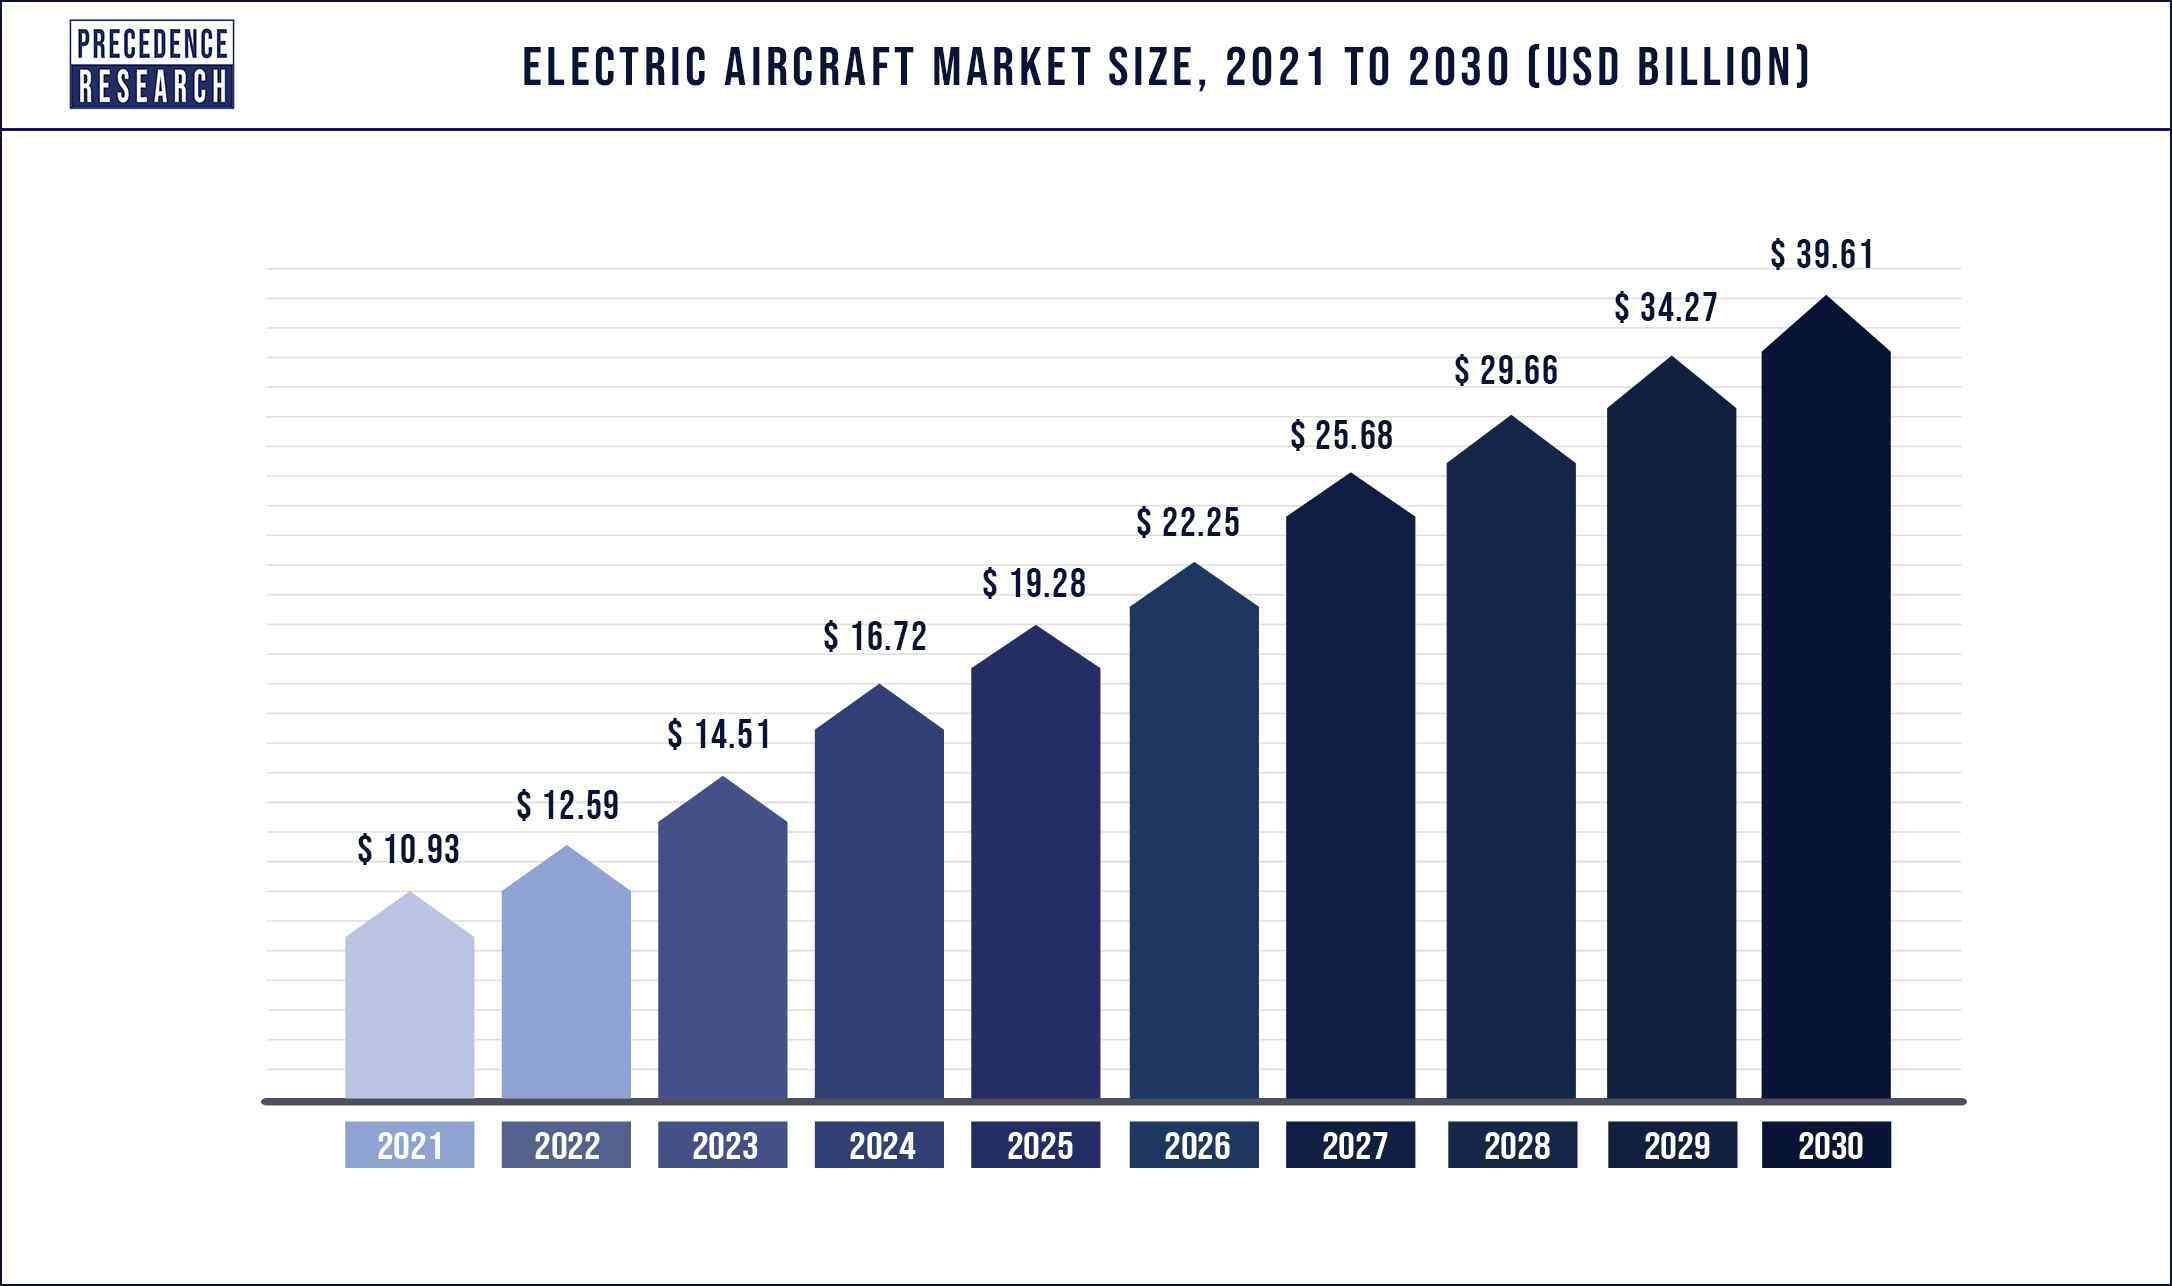 Electric Aircraft Market Size 2021 to 2030